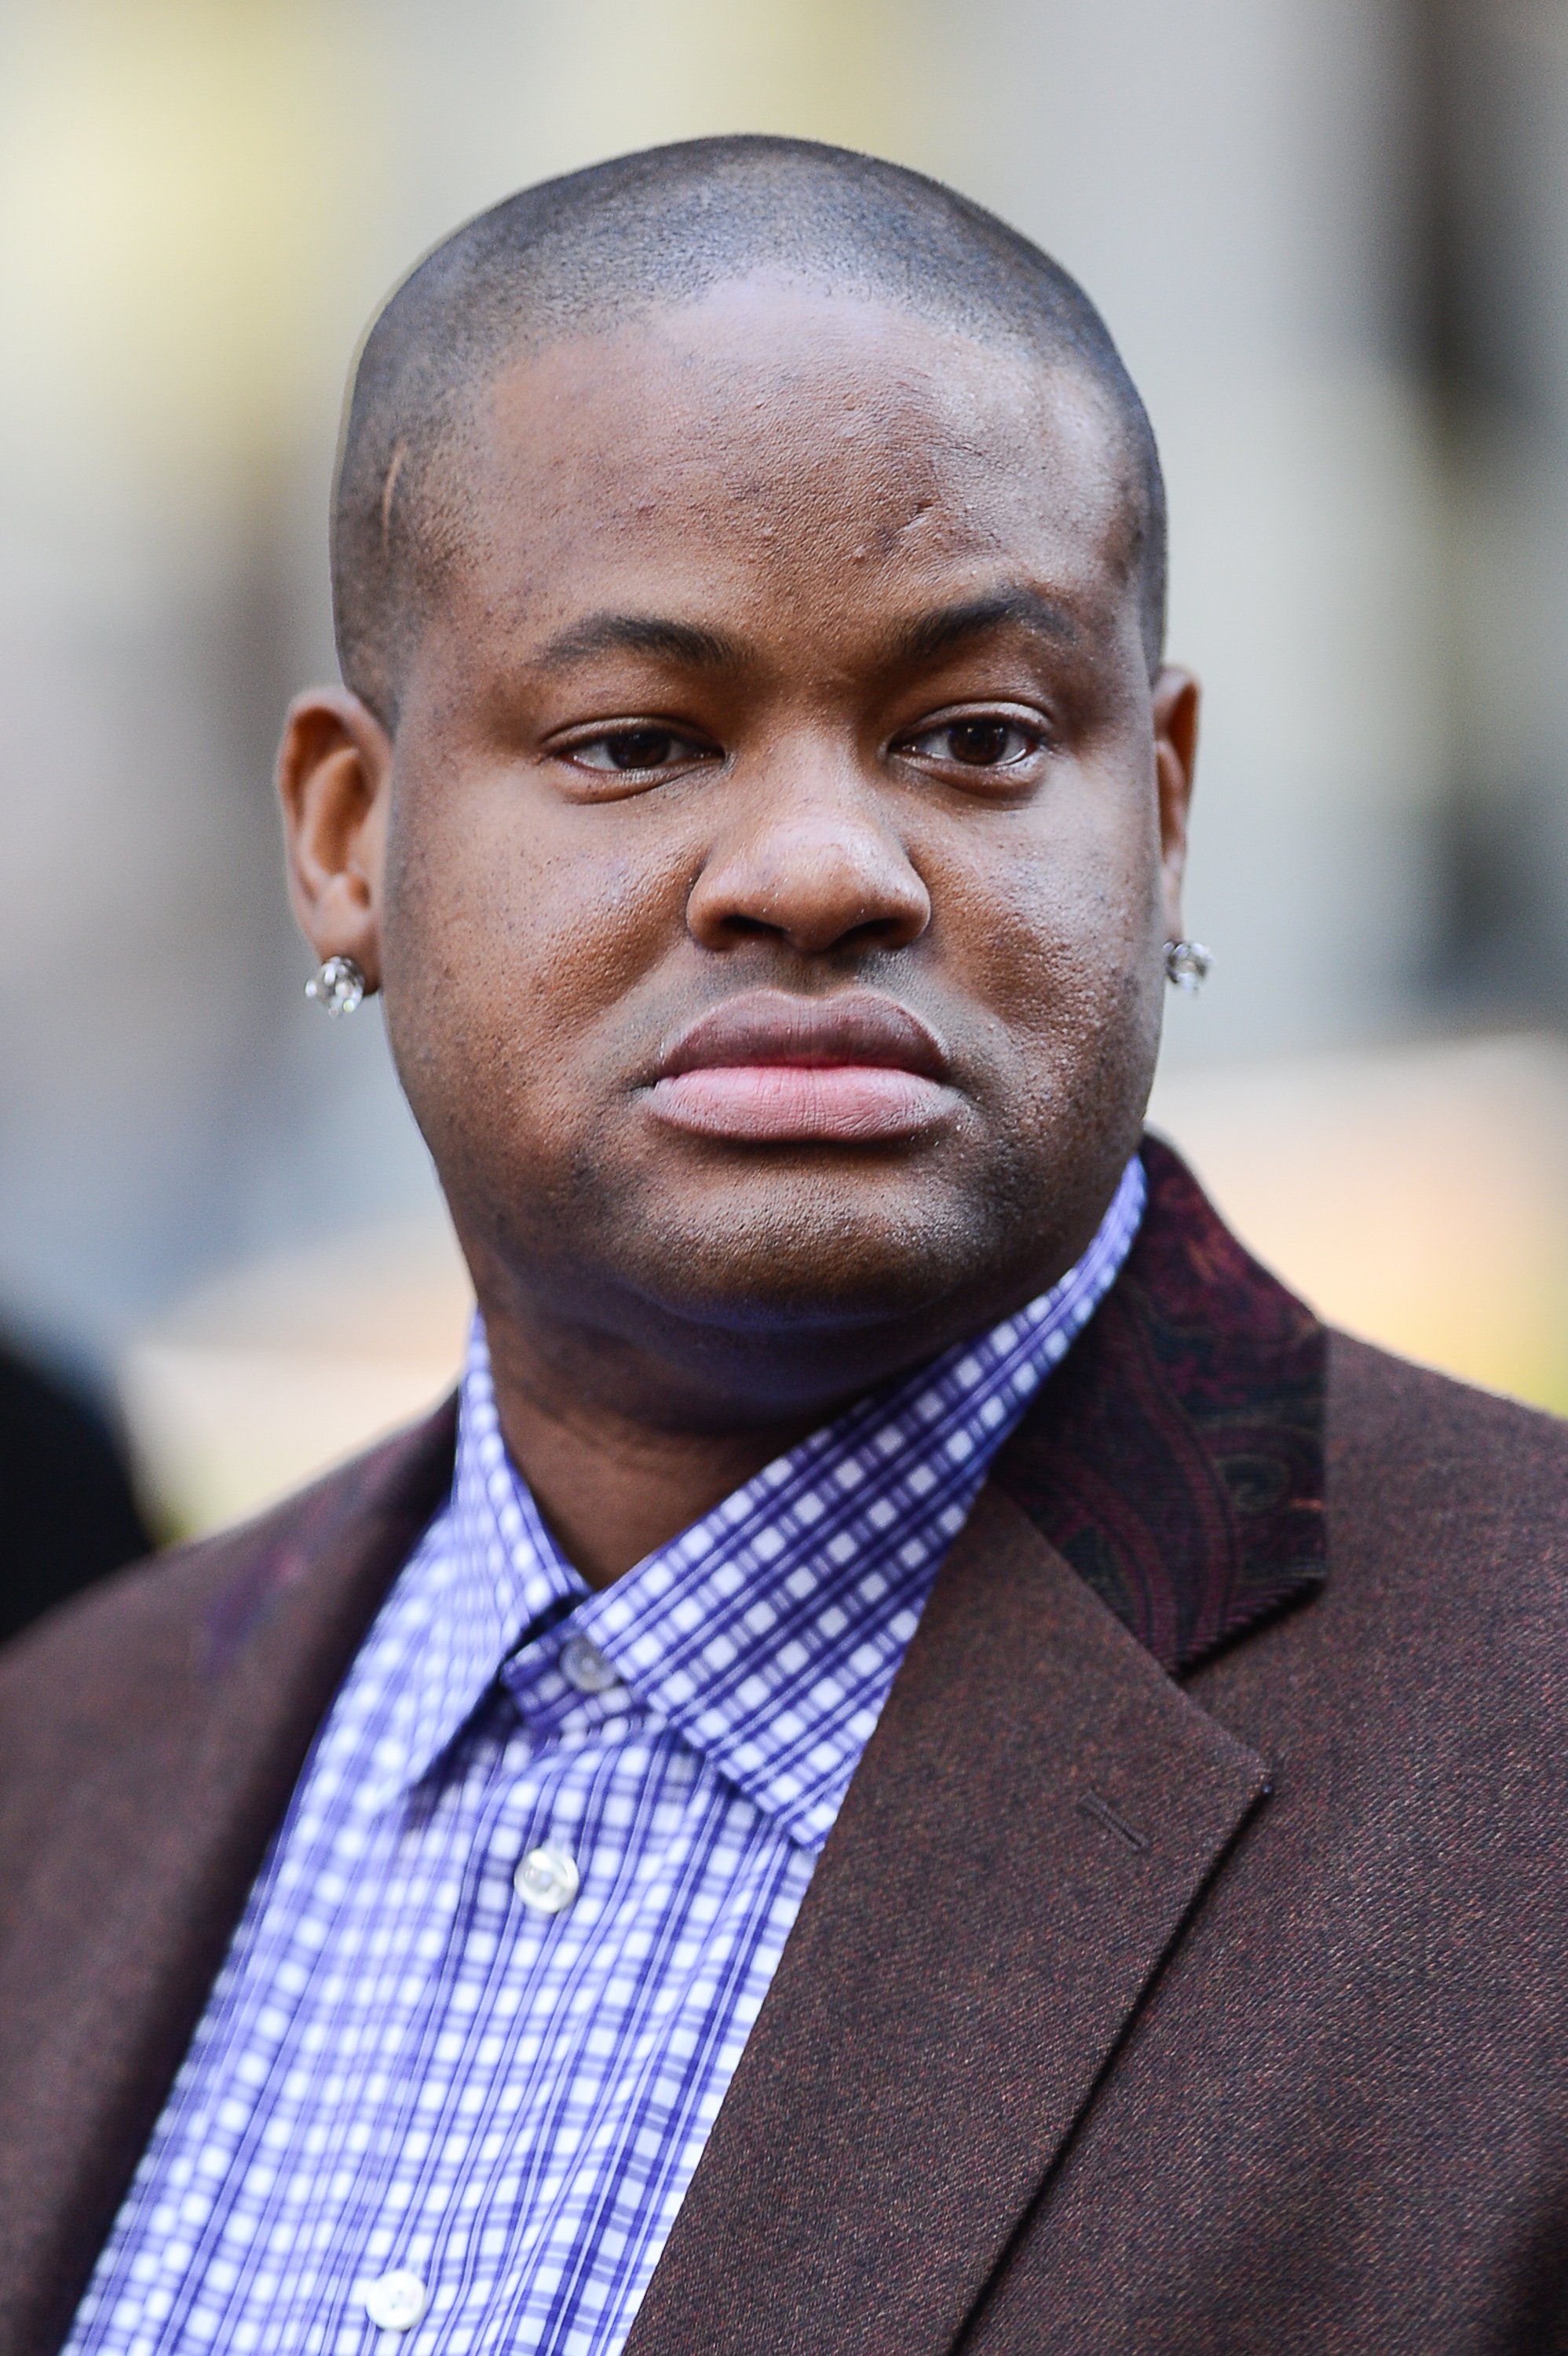 Vincent Herbert in New York City in September 2012. | Photo: Getty Images